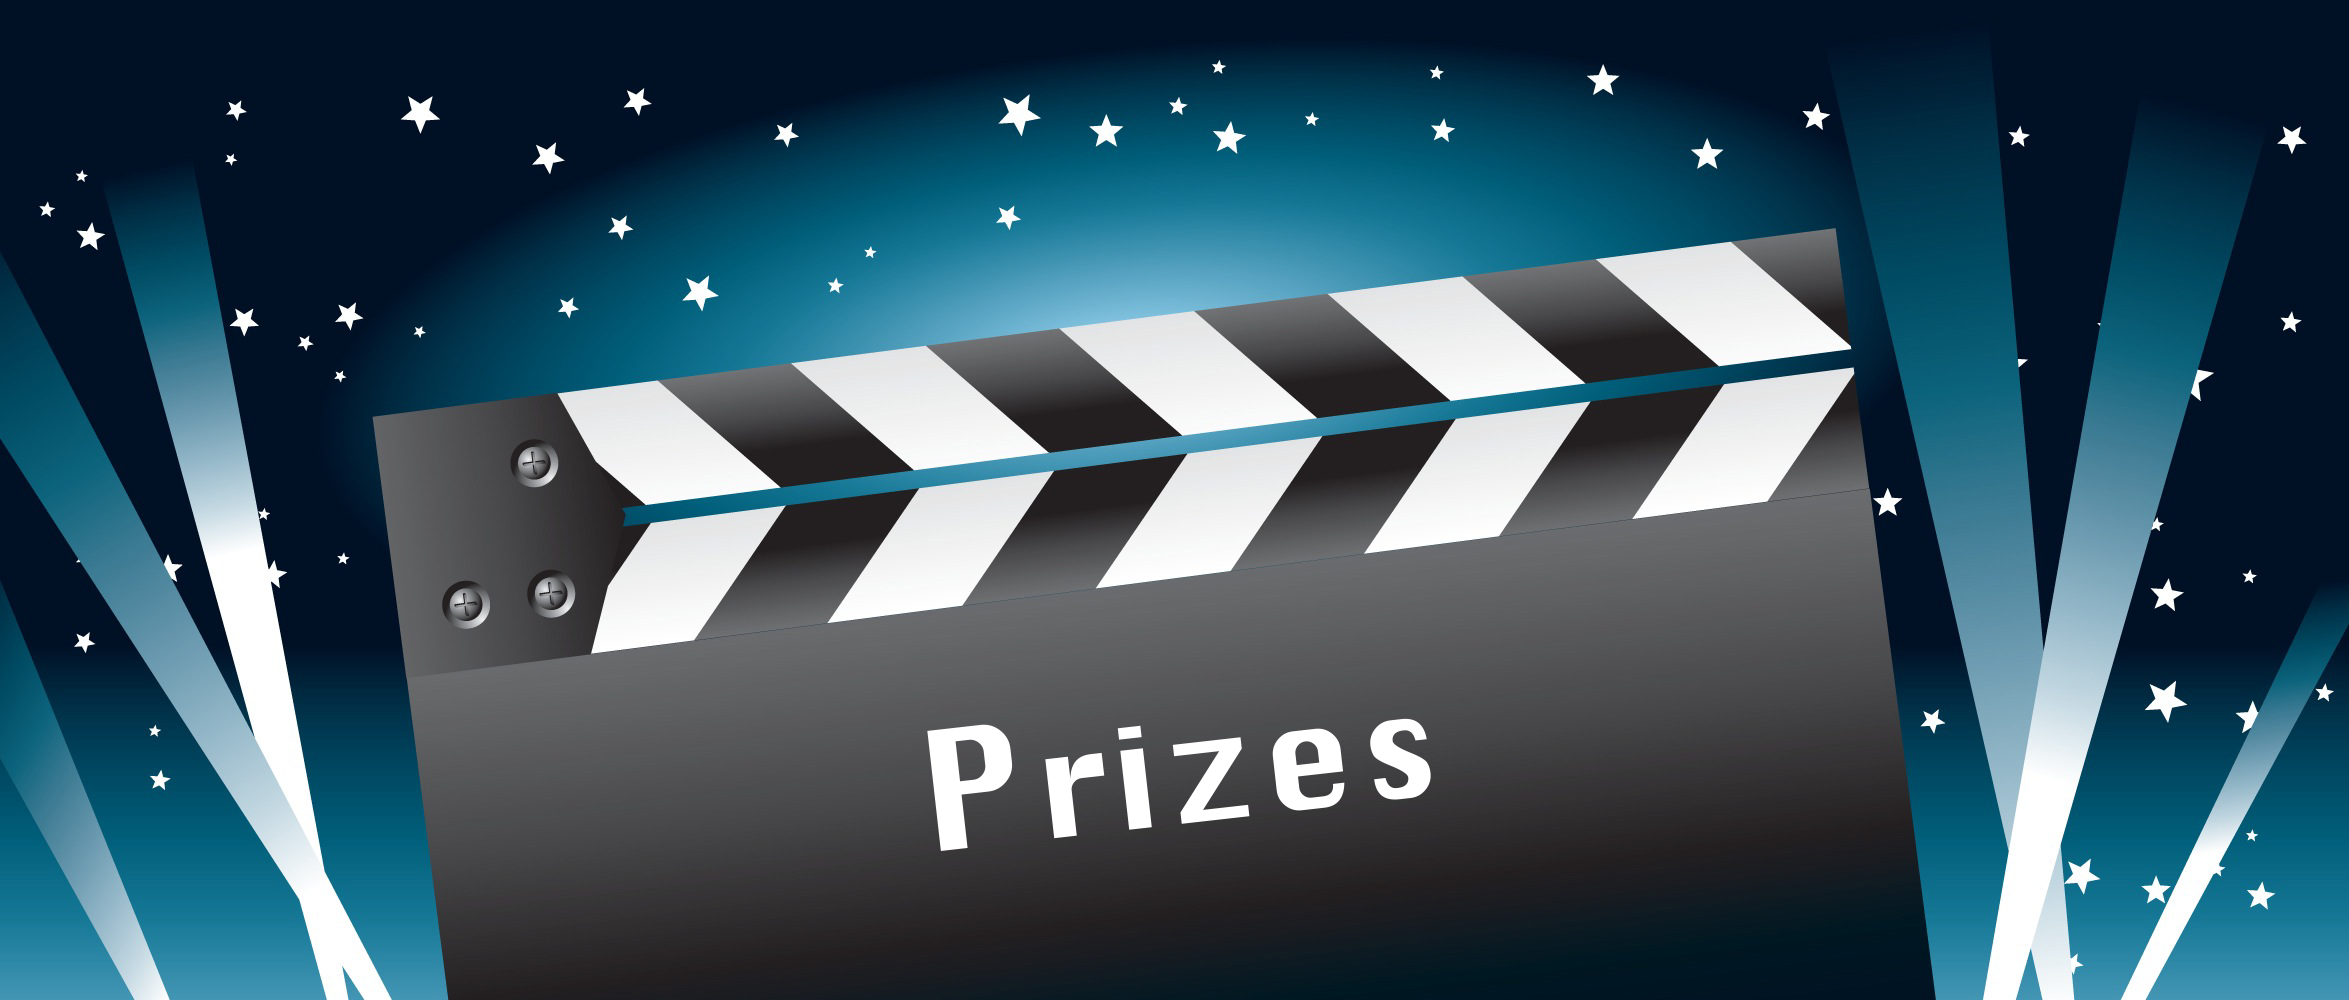 Over $55,000 in Prizes to be Distributed at Hamvention 2015